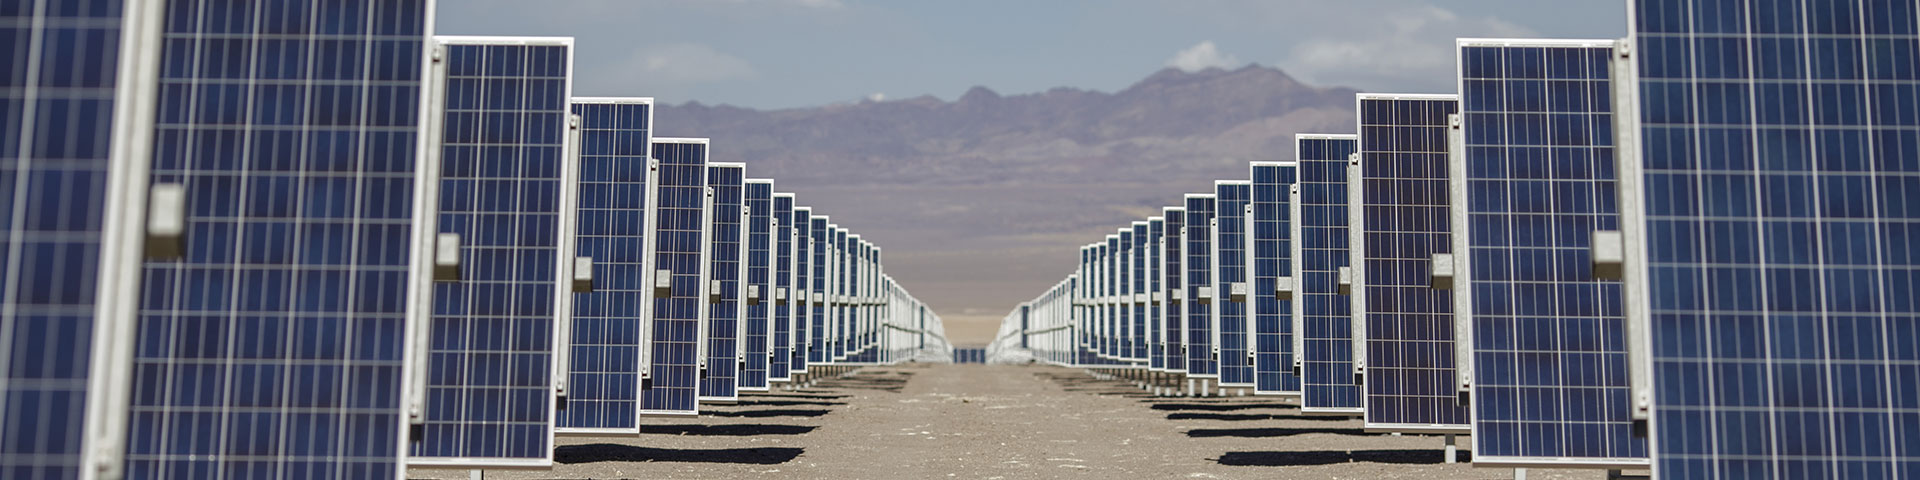 Several rows of solar panels stand on a field.